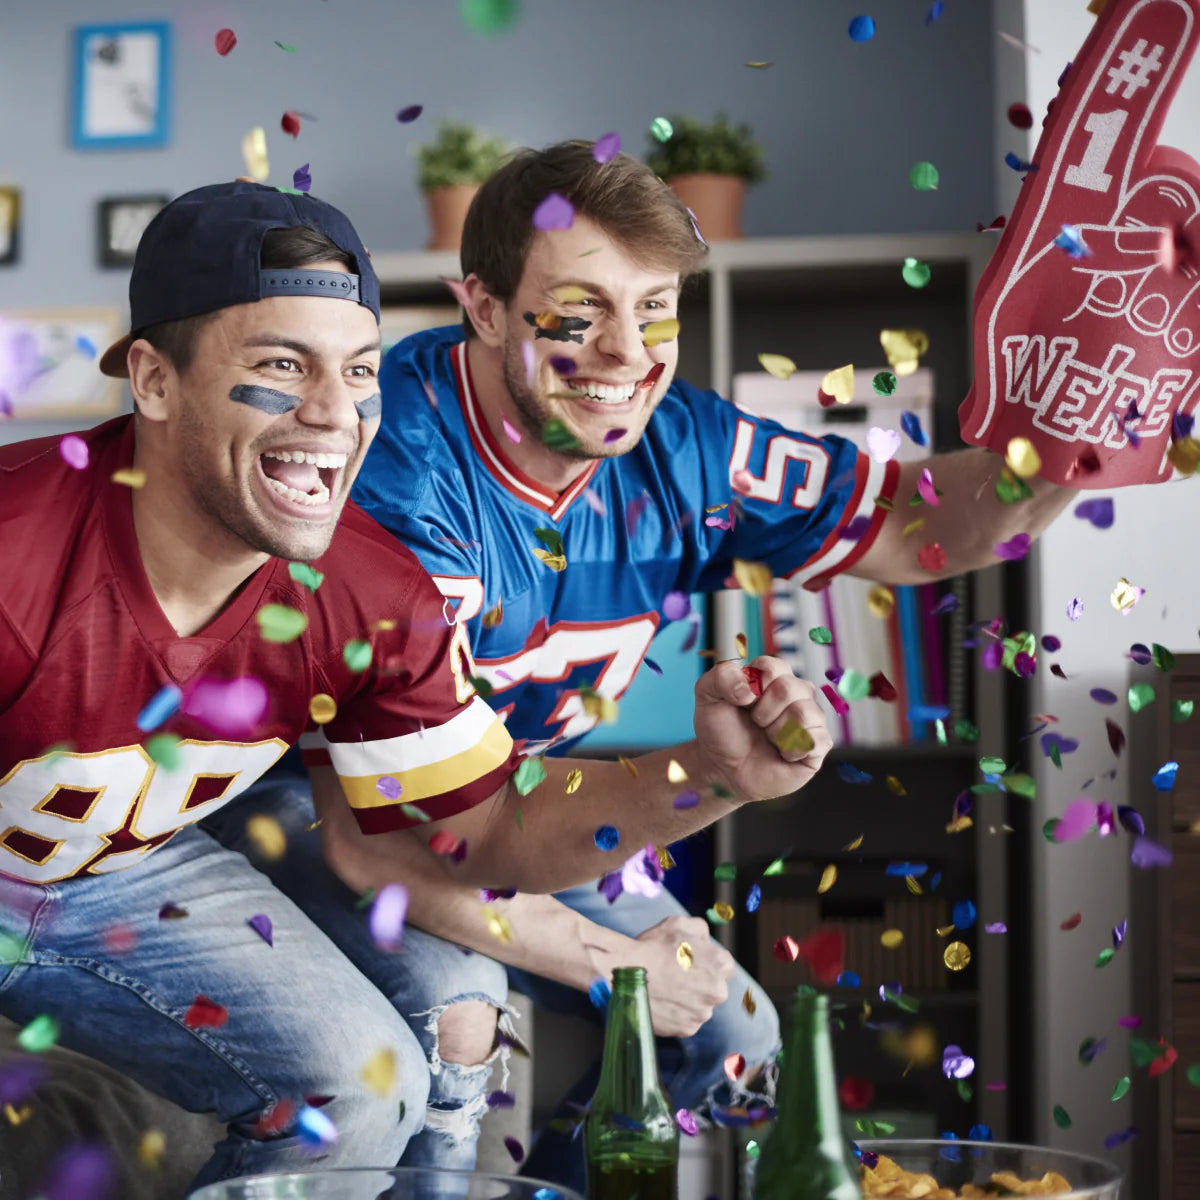 Supersize Your Big Game Party with a Super-Bright Projector